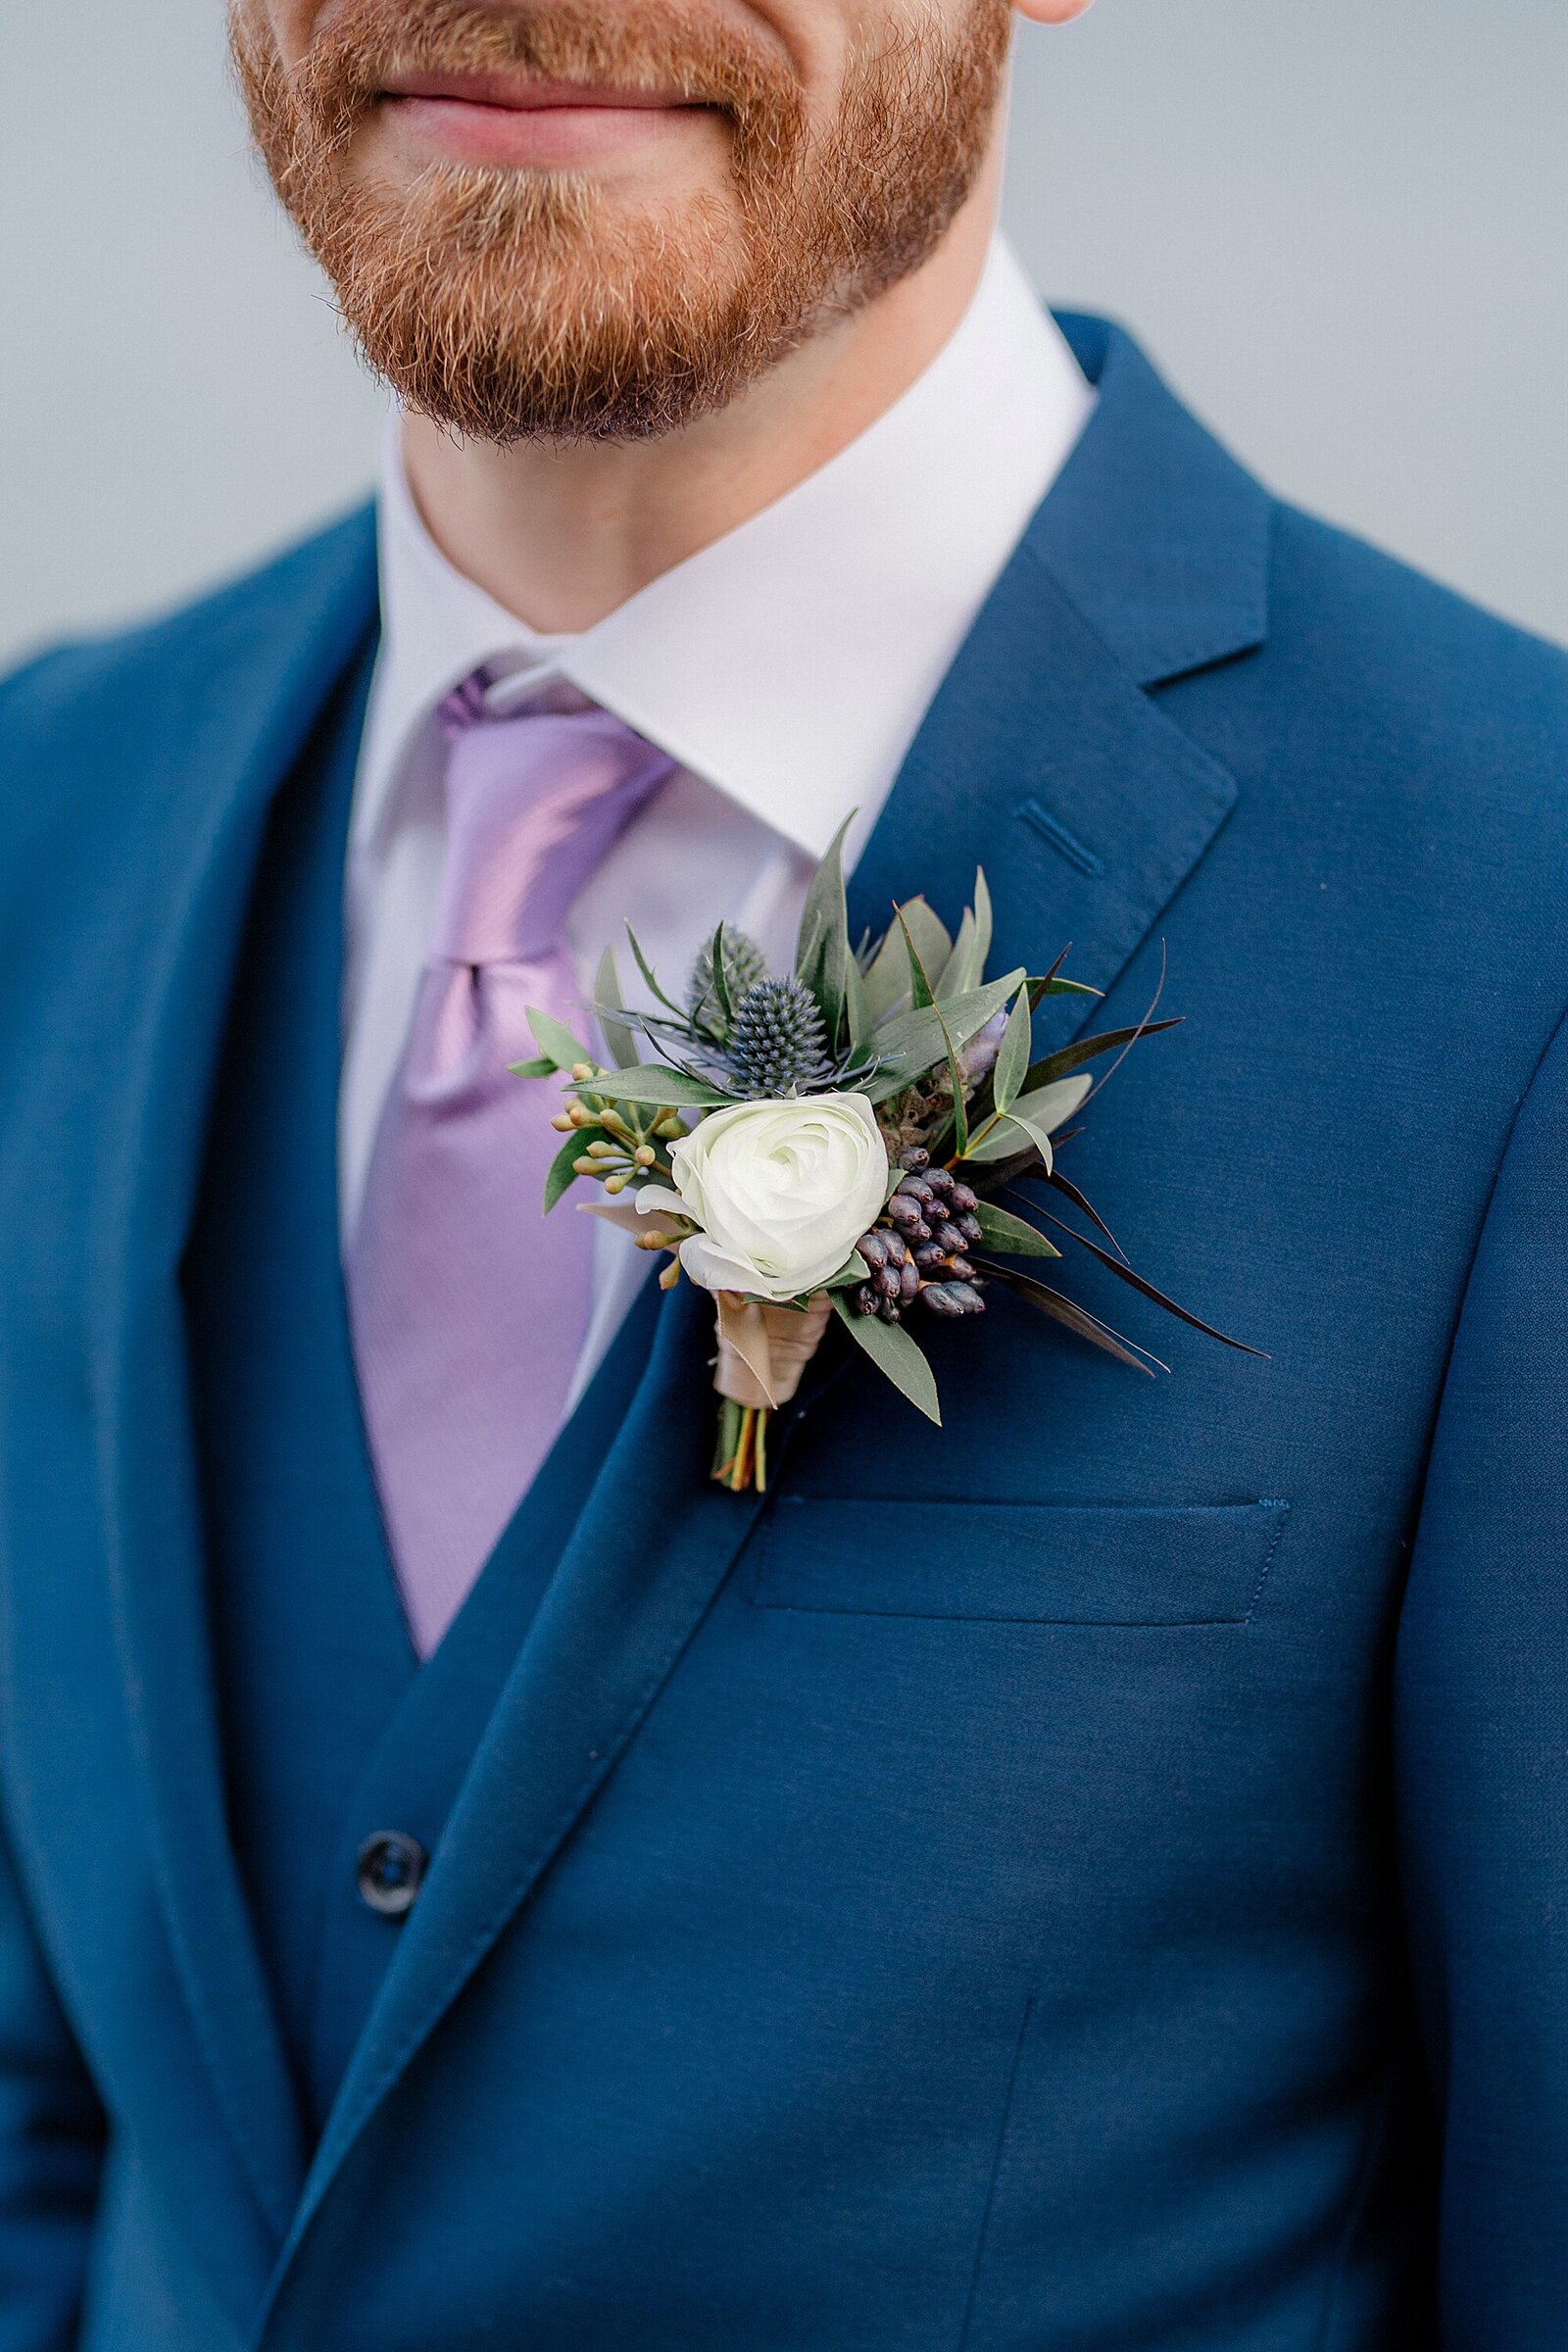 This is a close up of a boutonniere, which features a while rose. The man is wearing a lilac tie an blue suit, which is what he wore to his Minnesota wedding.